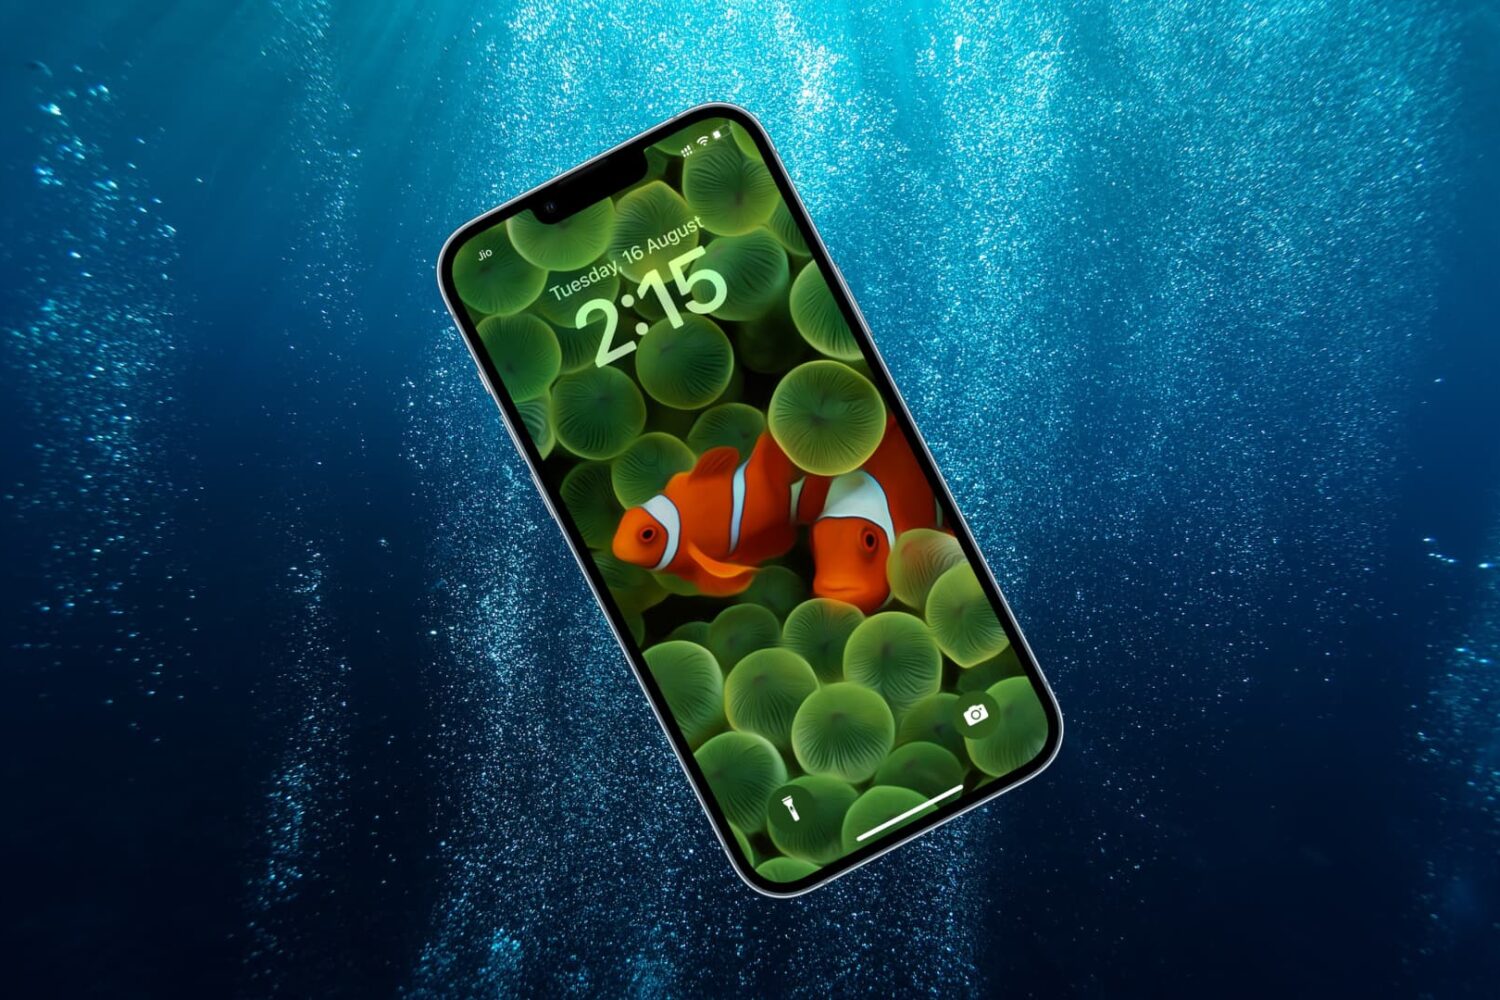 iPhone falling under water